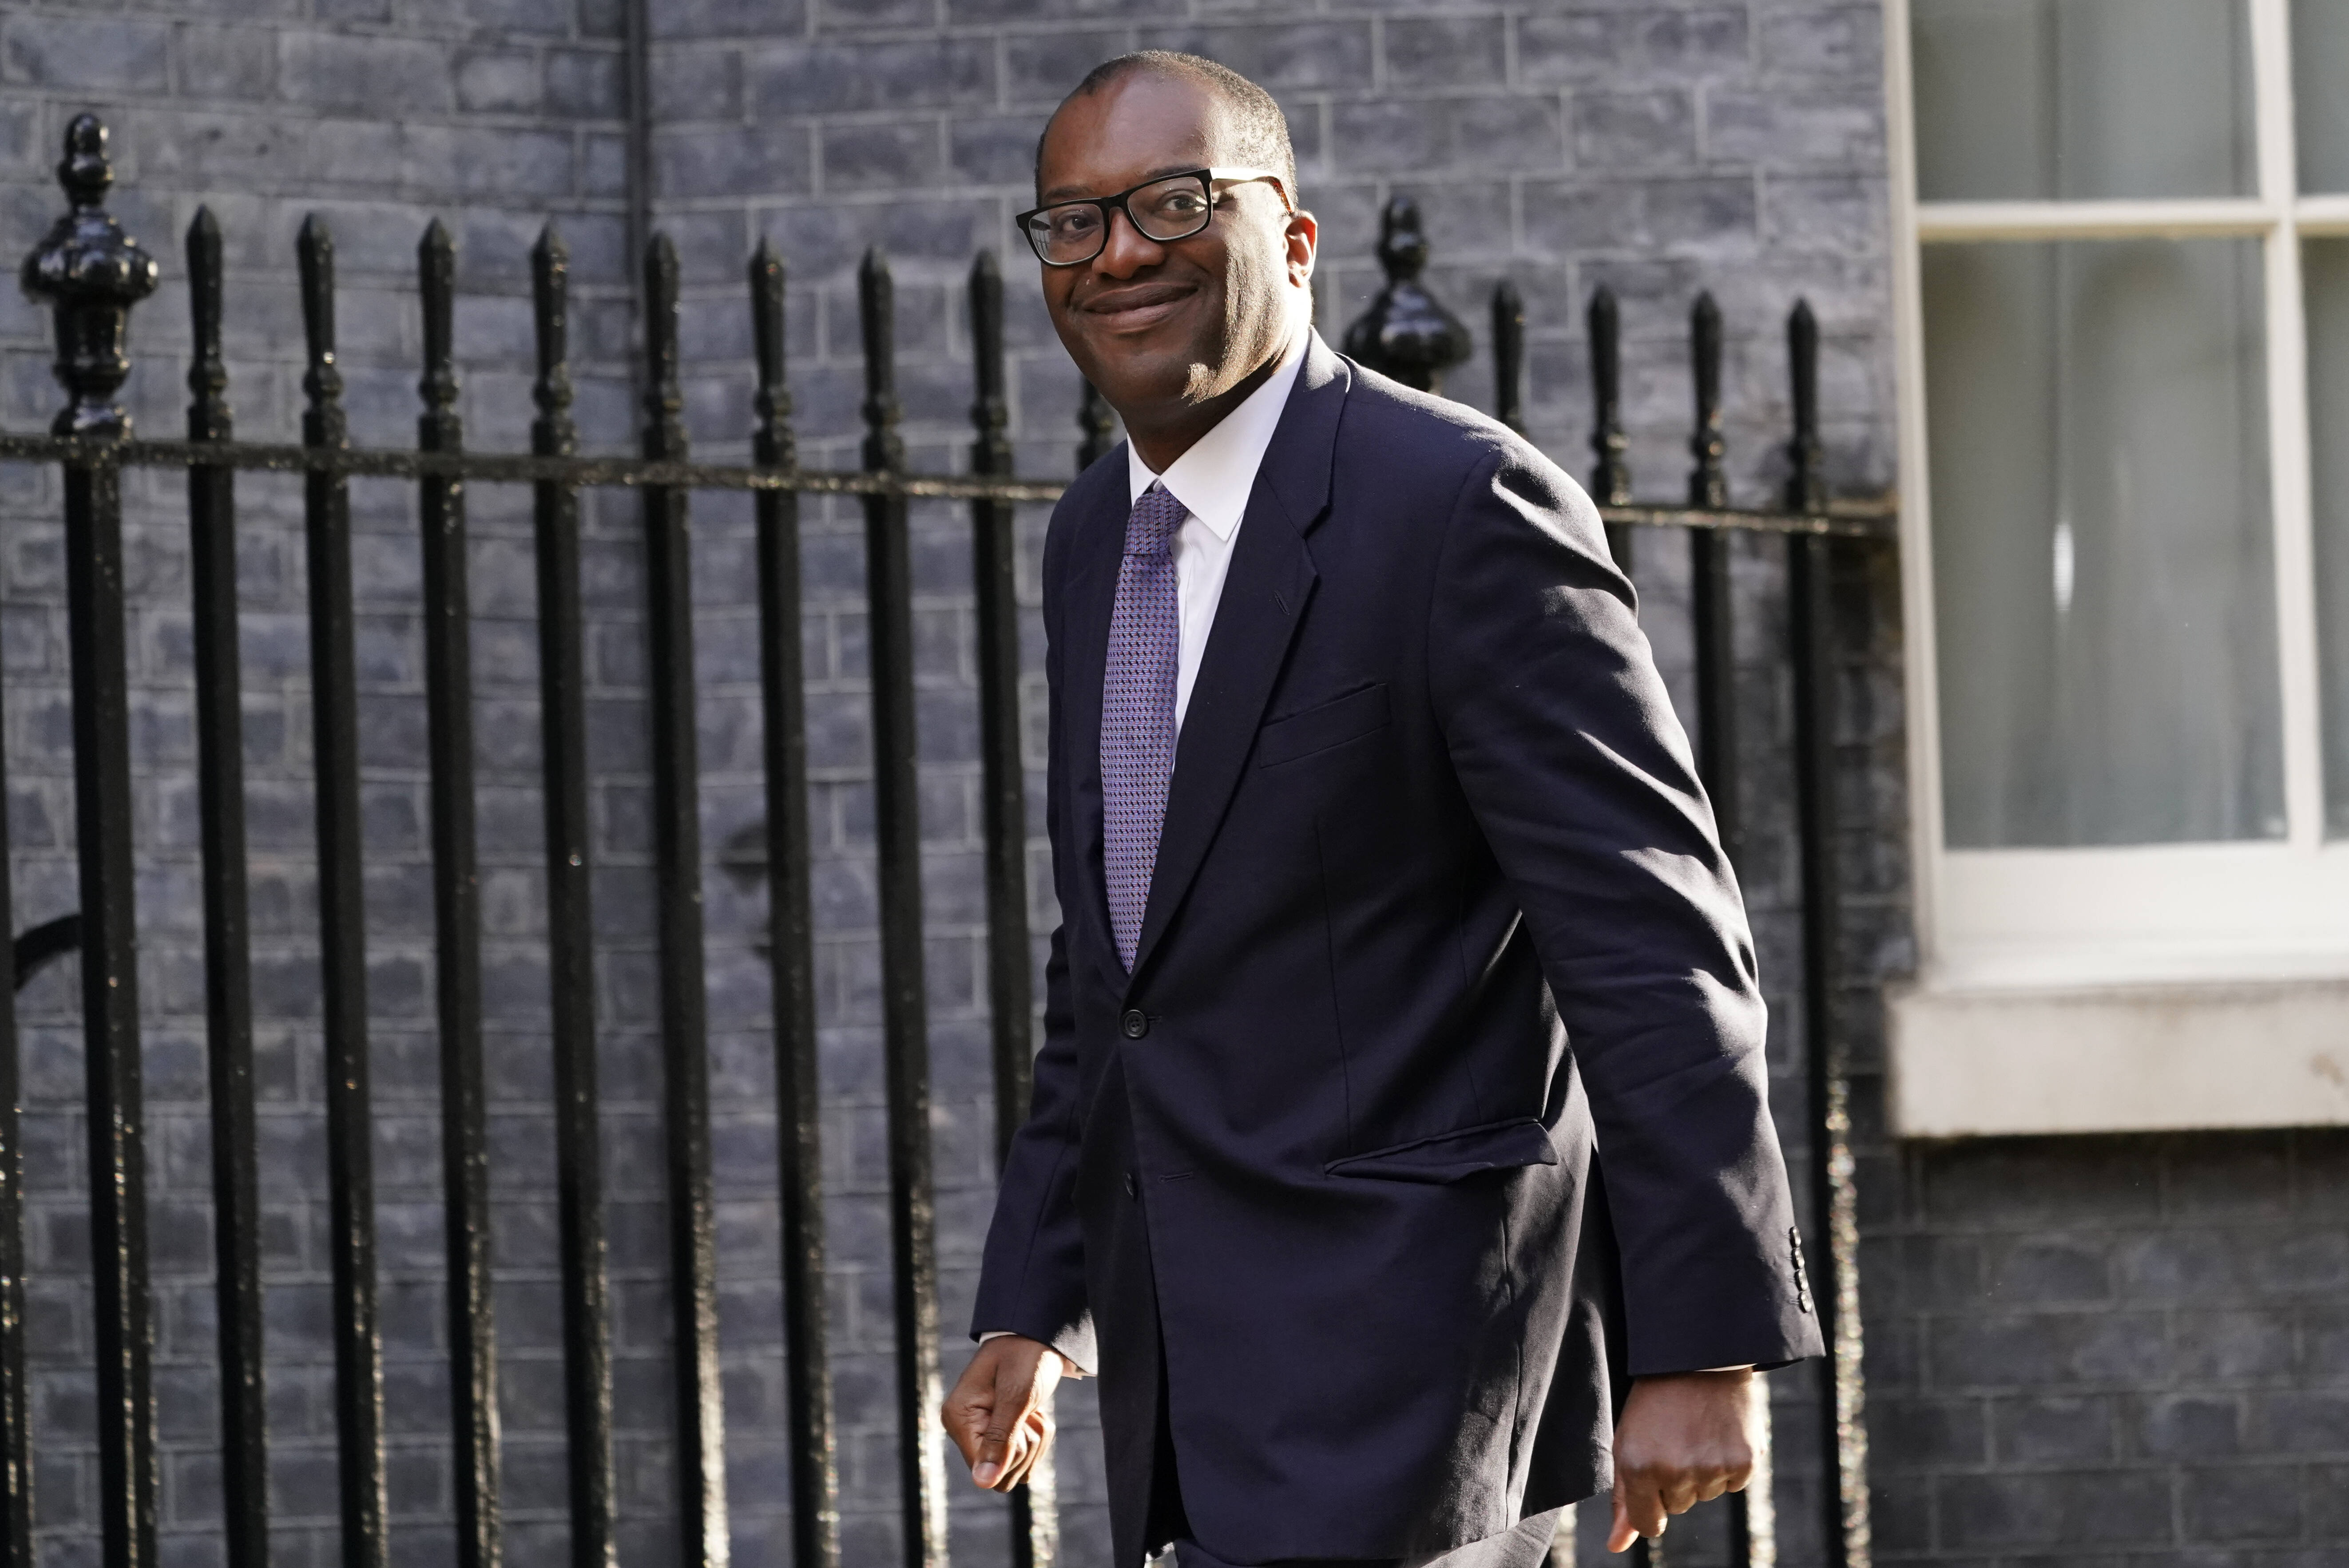 Britain's Chancellor of the Exchequer Kwasi Kwarteng arrives at Downing Street in London on Sept. 7 for the first cabinet meeting since Liz Truss was installed as British prime minister a day earlier. (Alberto Pezzali/AP)